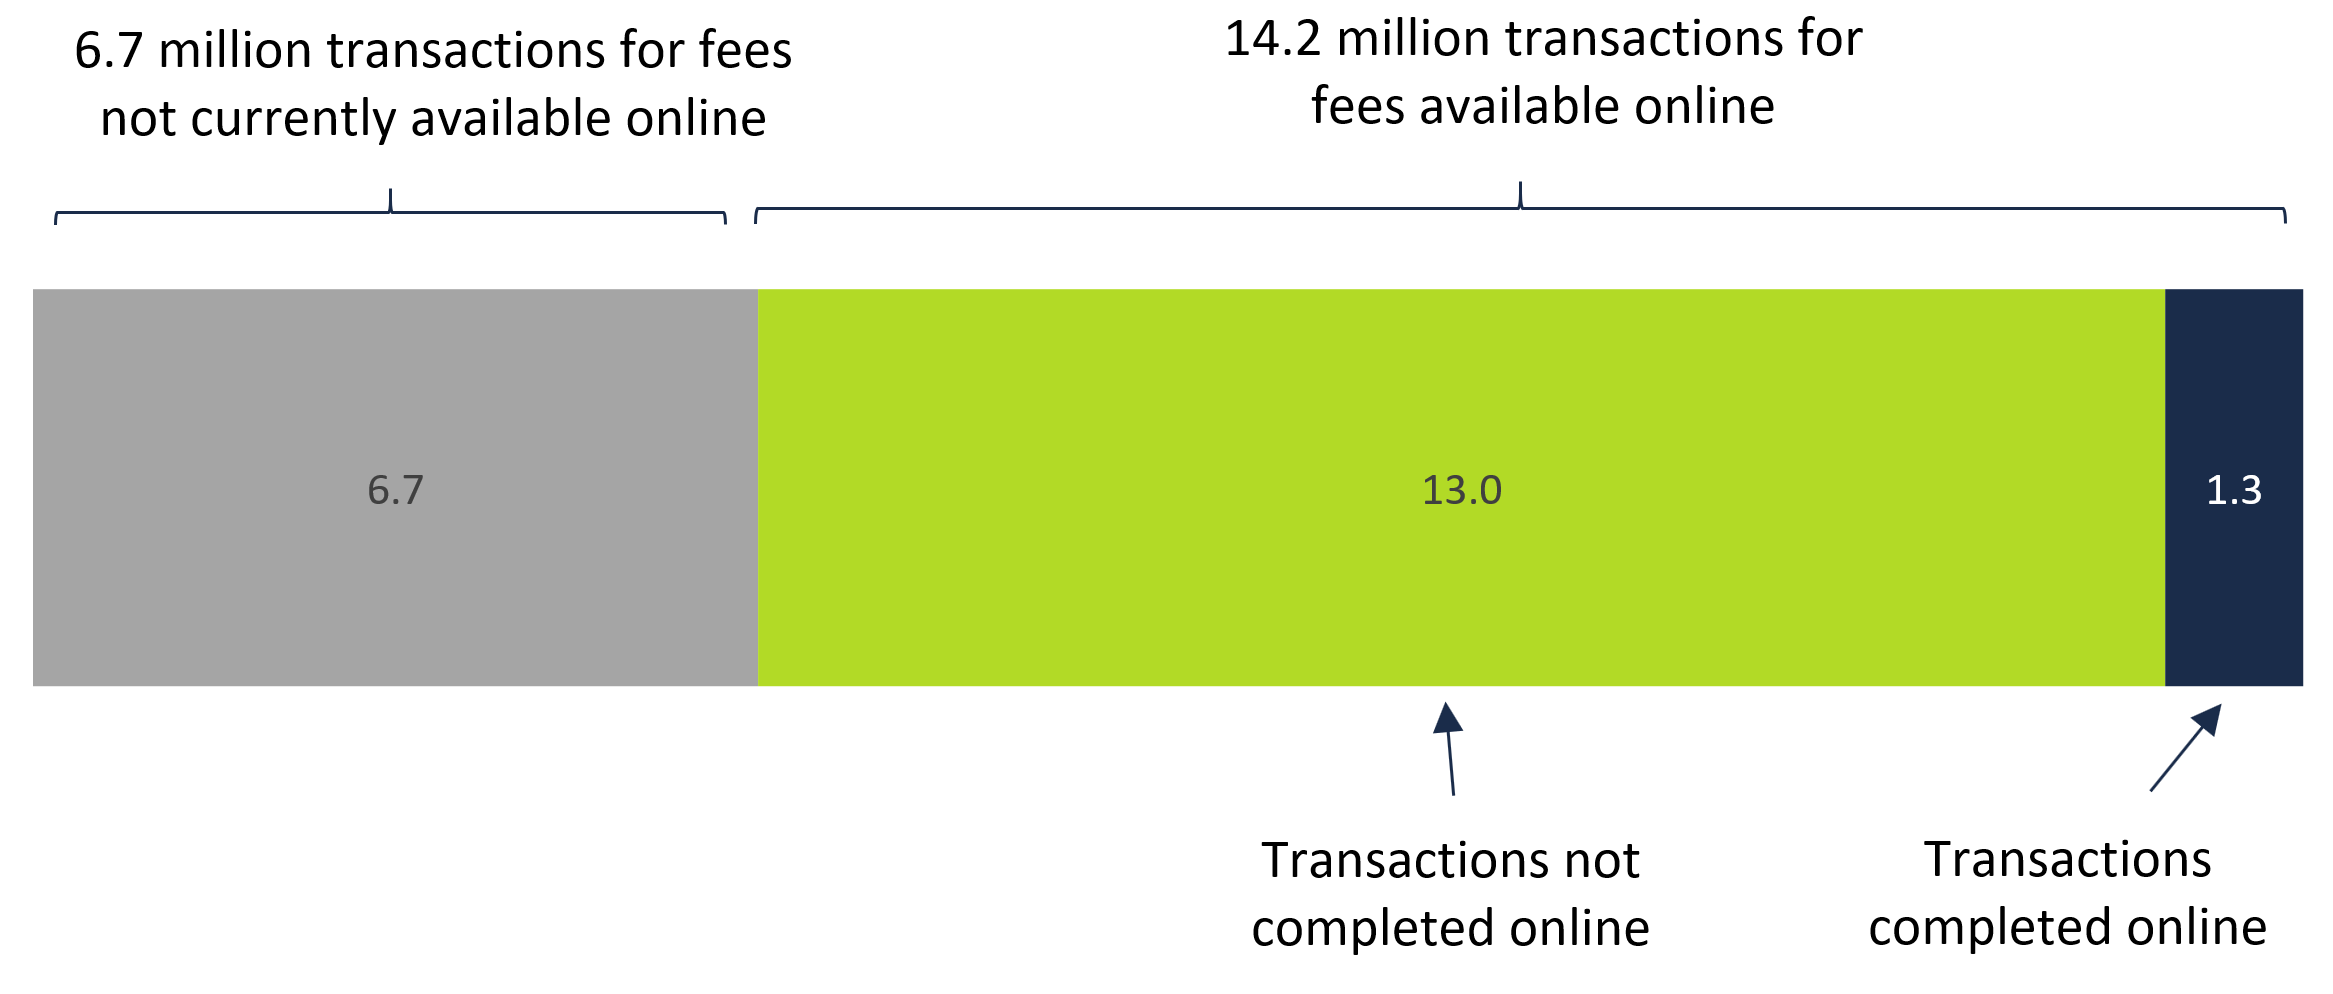 Breakdown of 20.9 million driving fees transactions by method of delivery